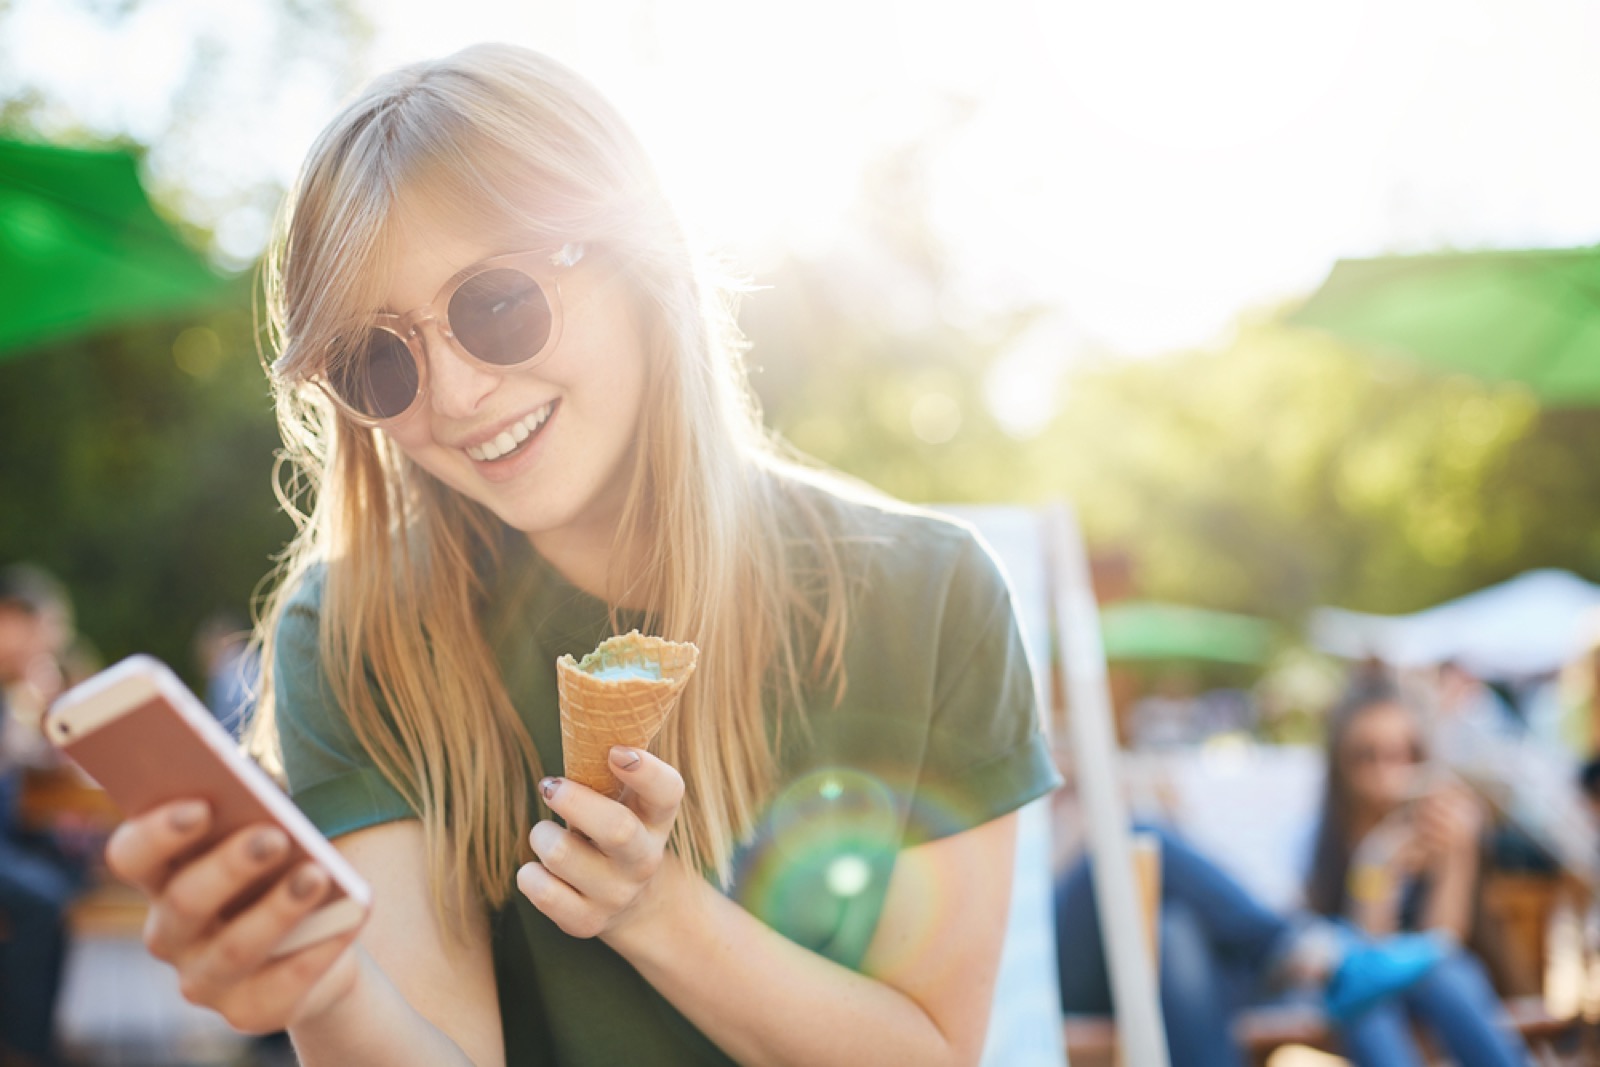 Are You More of an Introvert or an Extrovert? Woman On Phone Eating Ice Cream